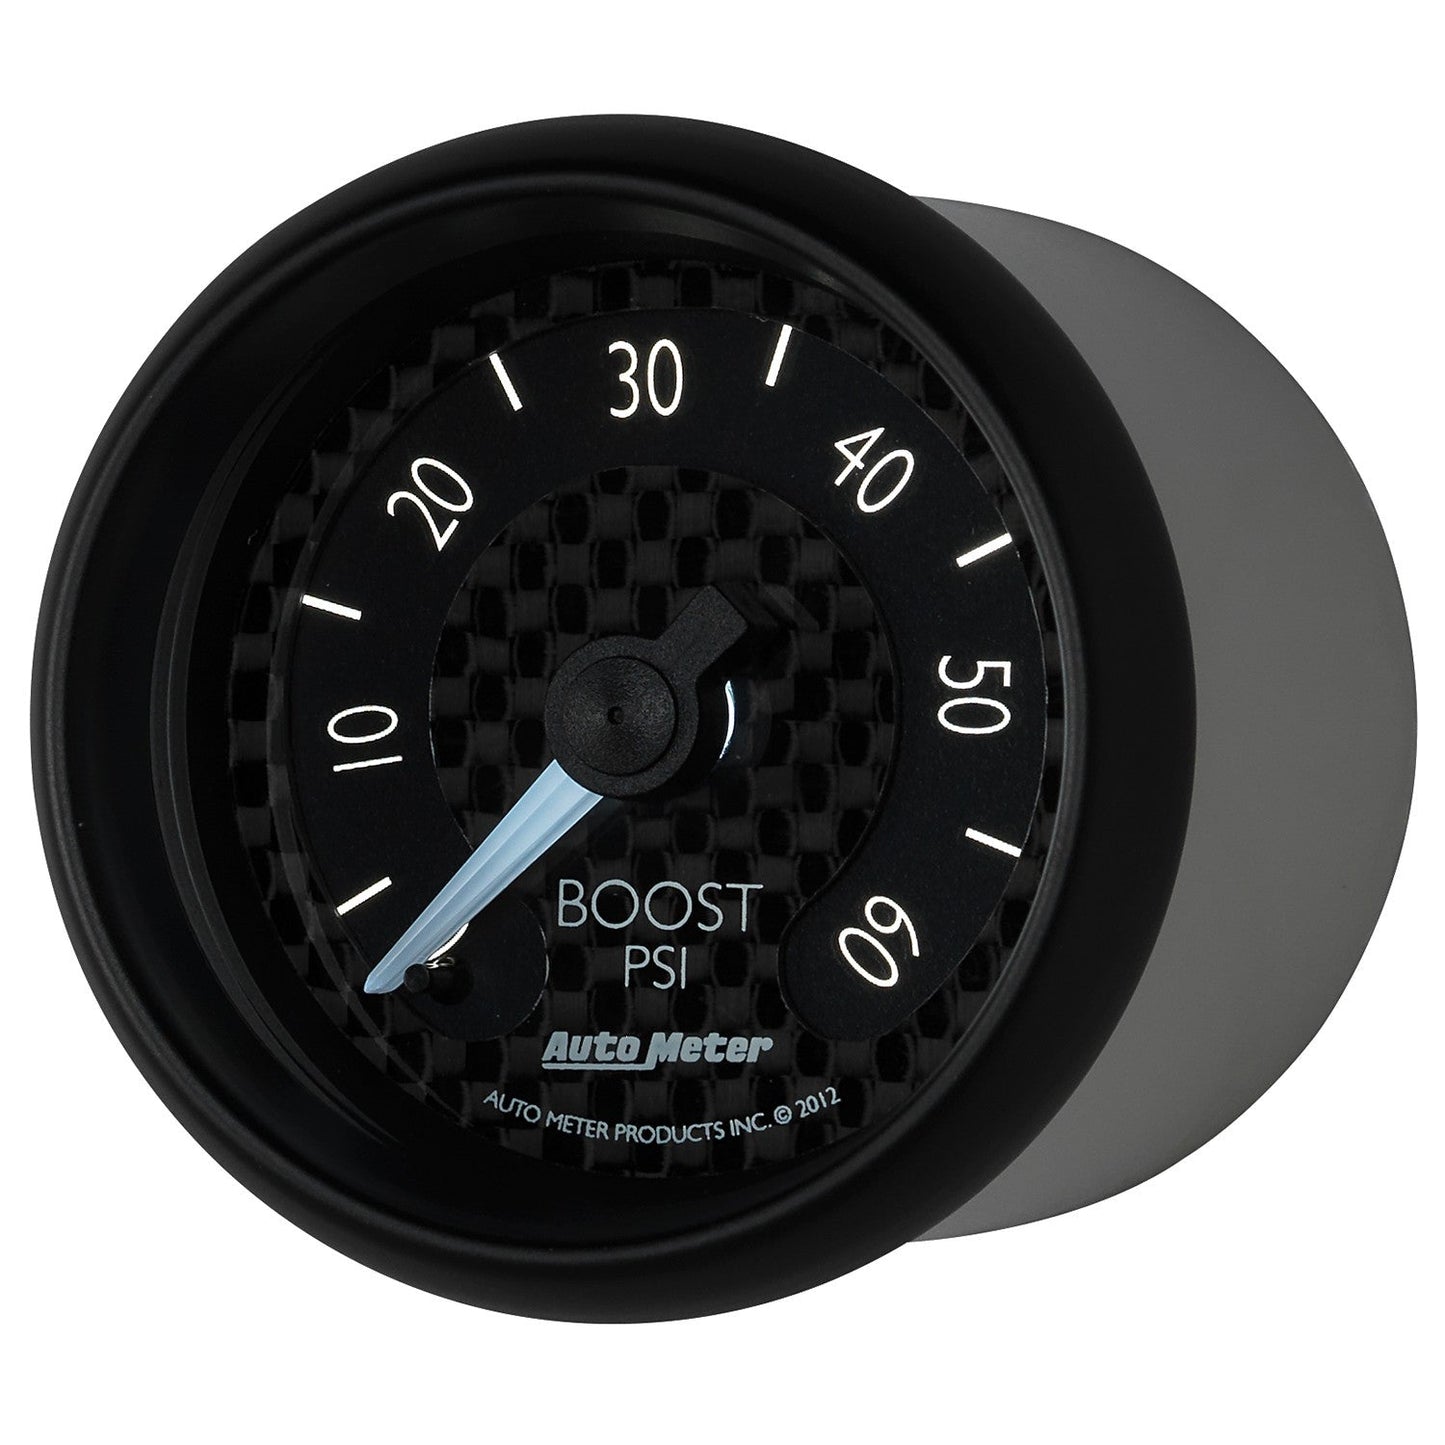 AutoMeter - 2-1/16" BOOST, 0-60 PSI, MECÁNICO, GT (8005)